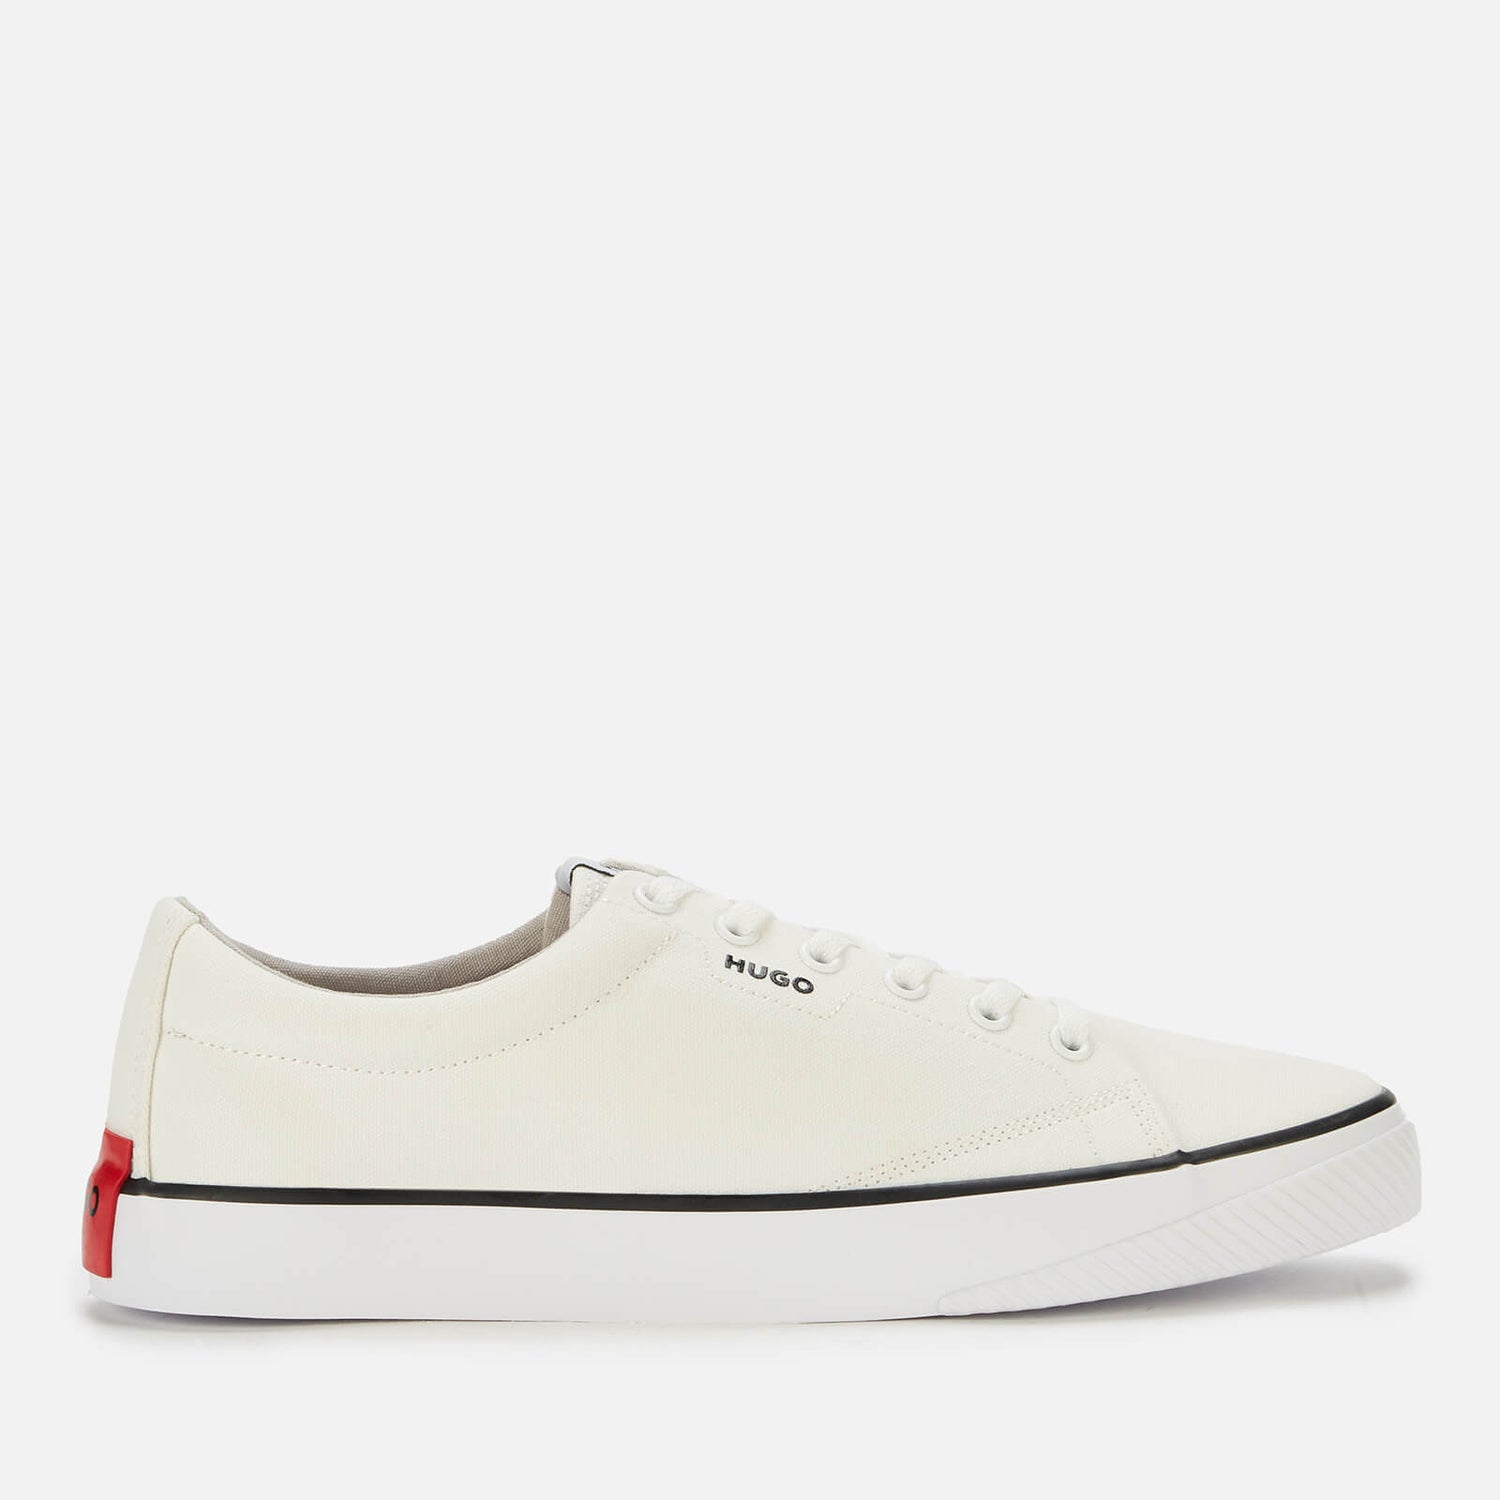 HUGO Men's Dyer Canvas Low Top Trainers - White - UK 7